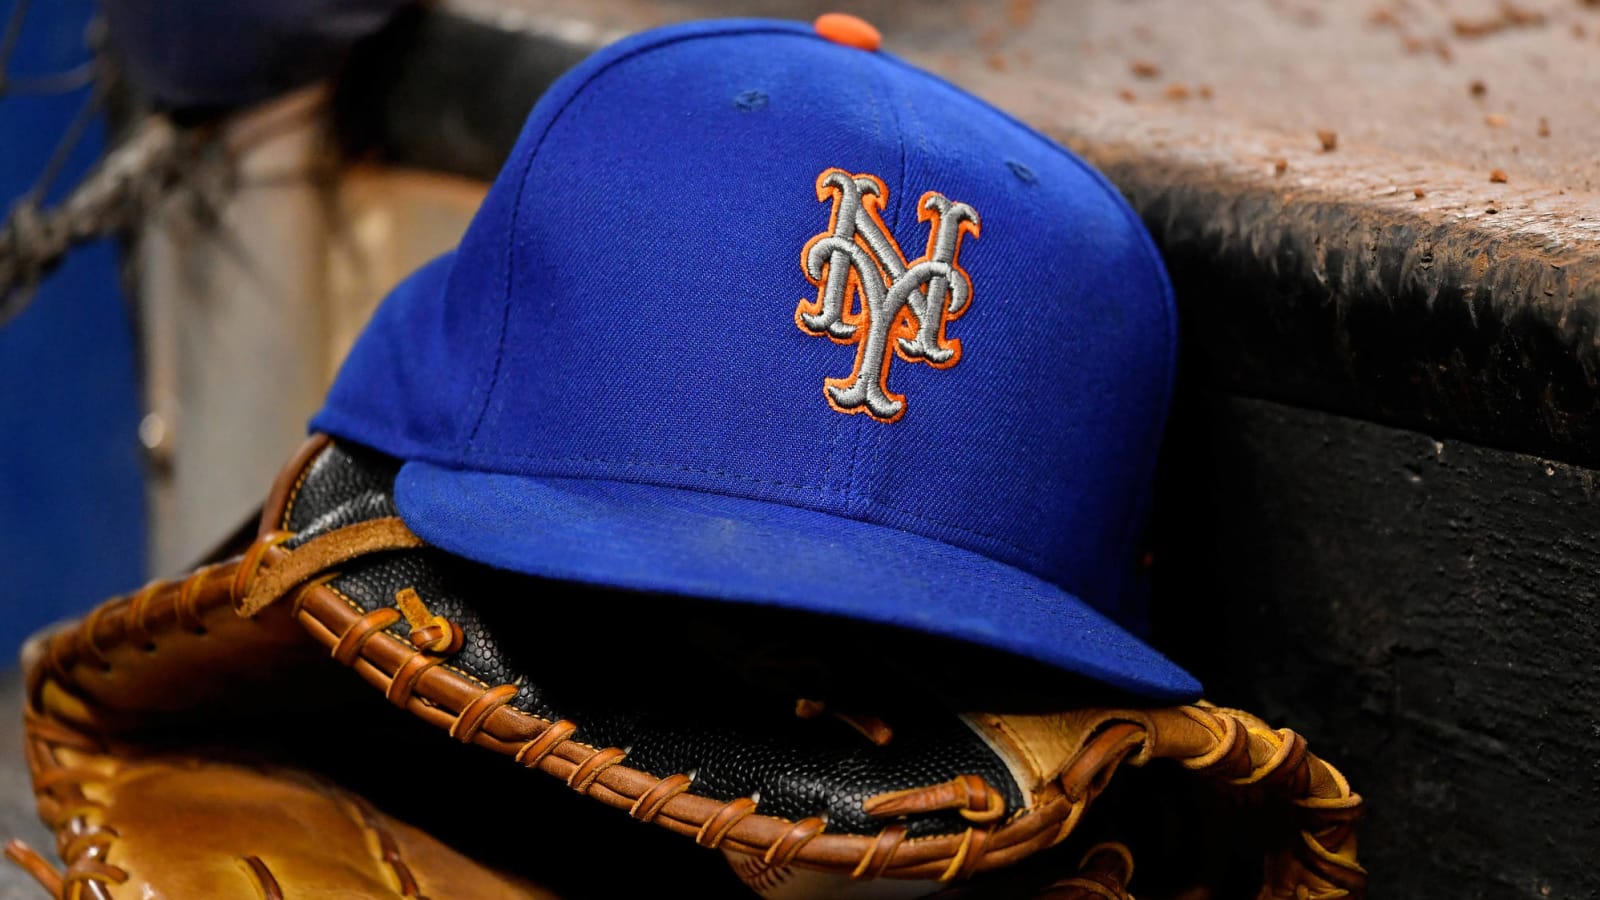 Report: Mets acting GM Zack Scott facing DWI charges